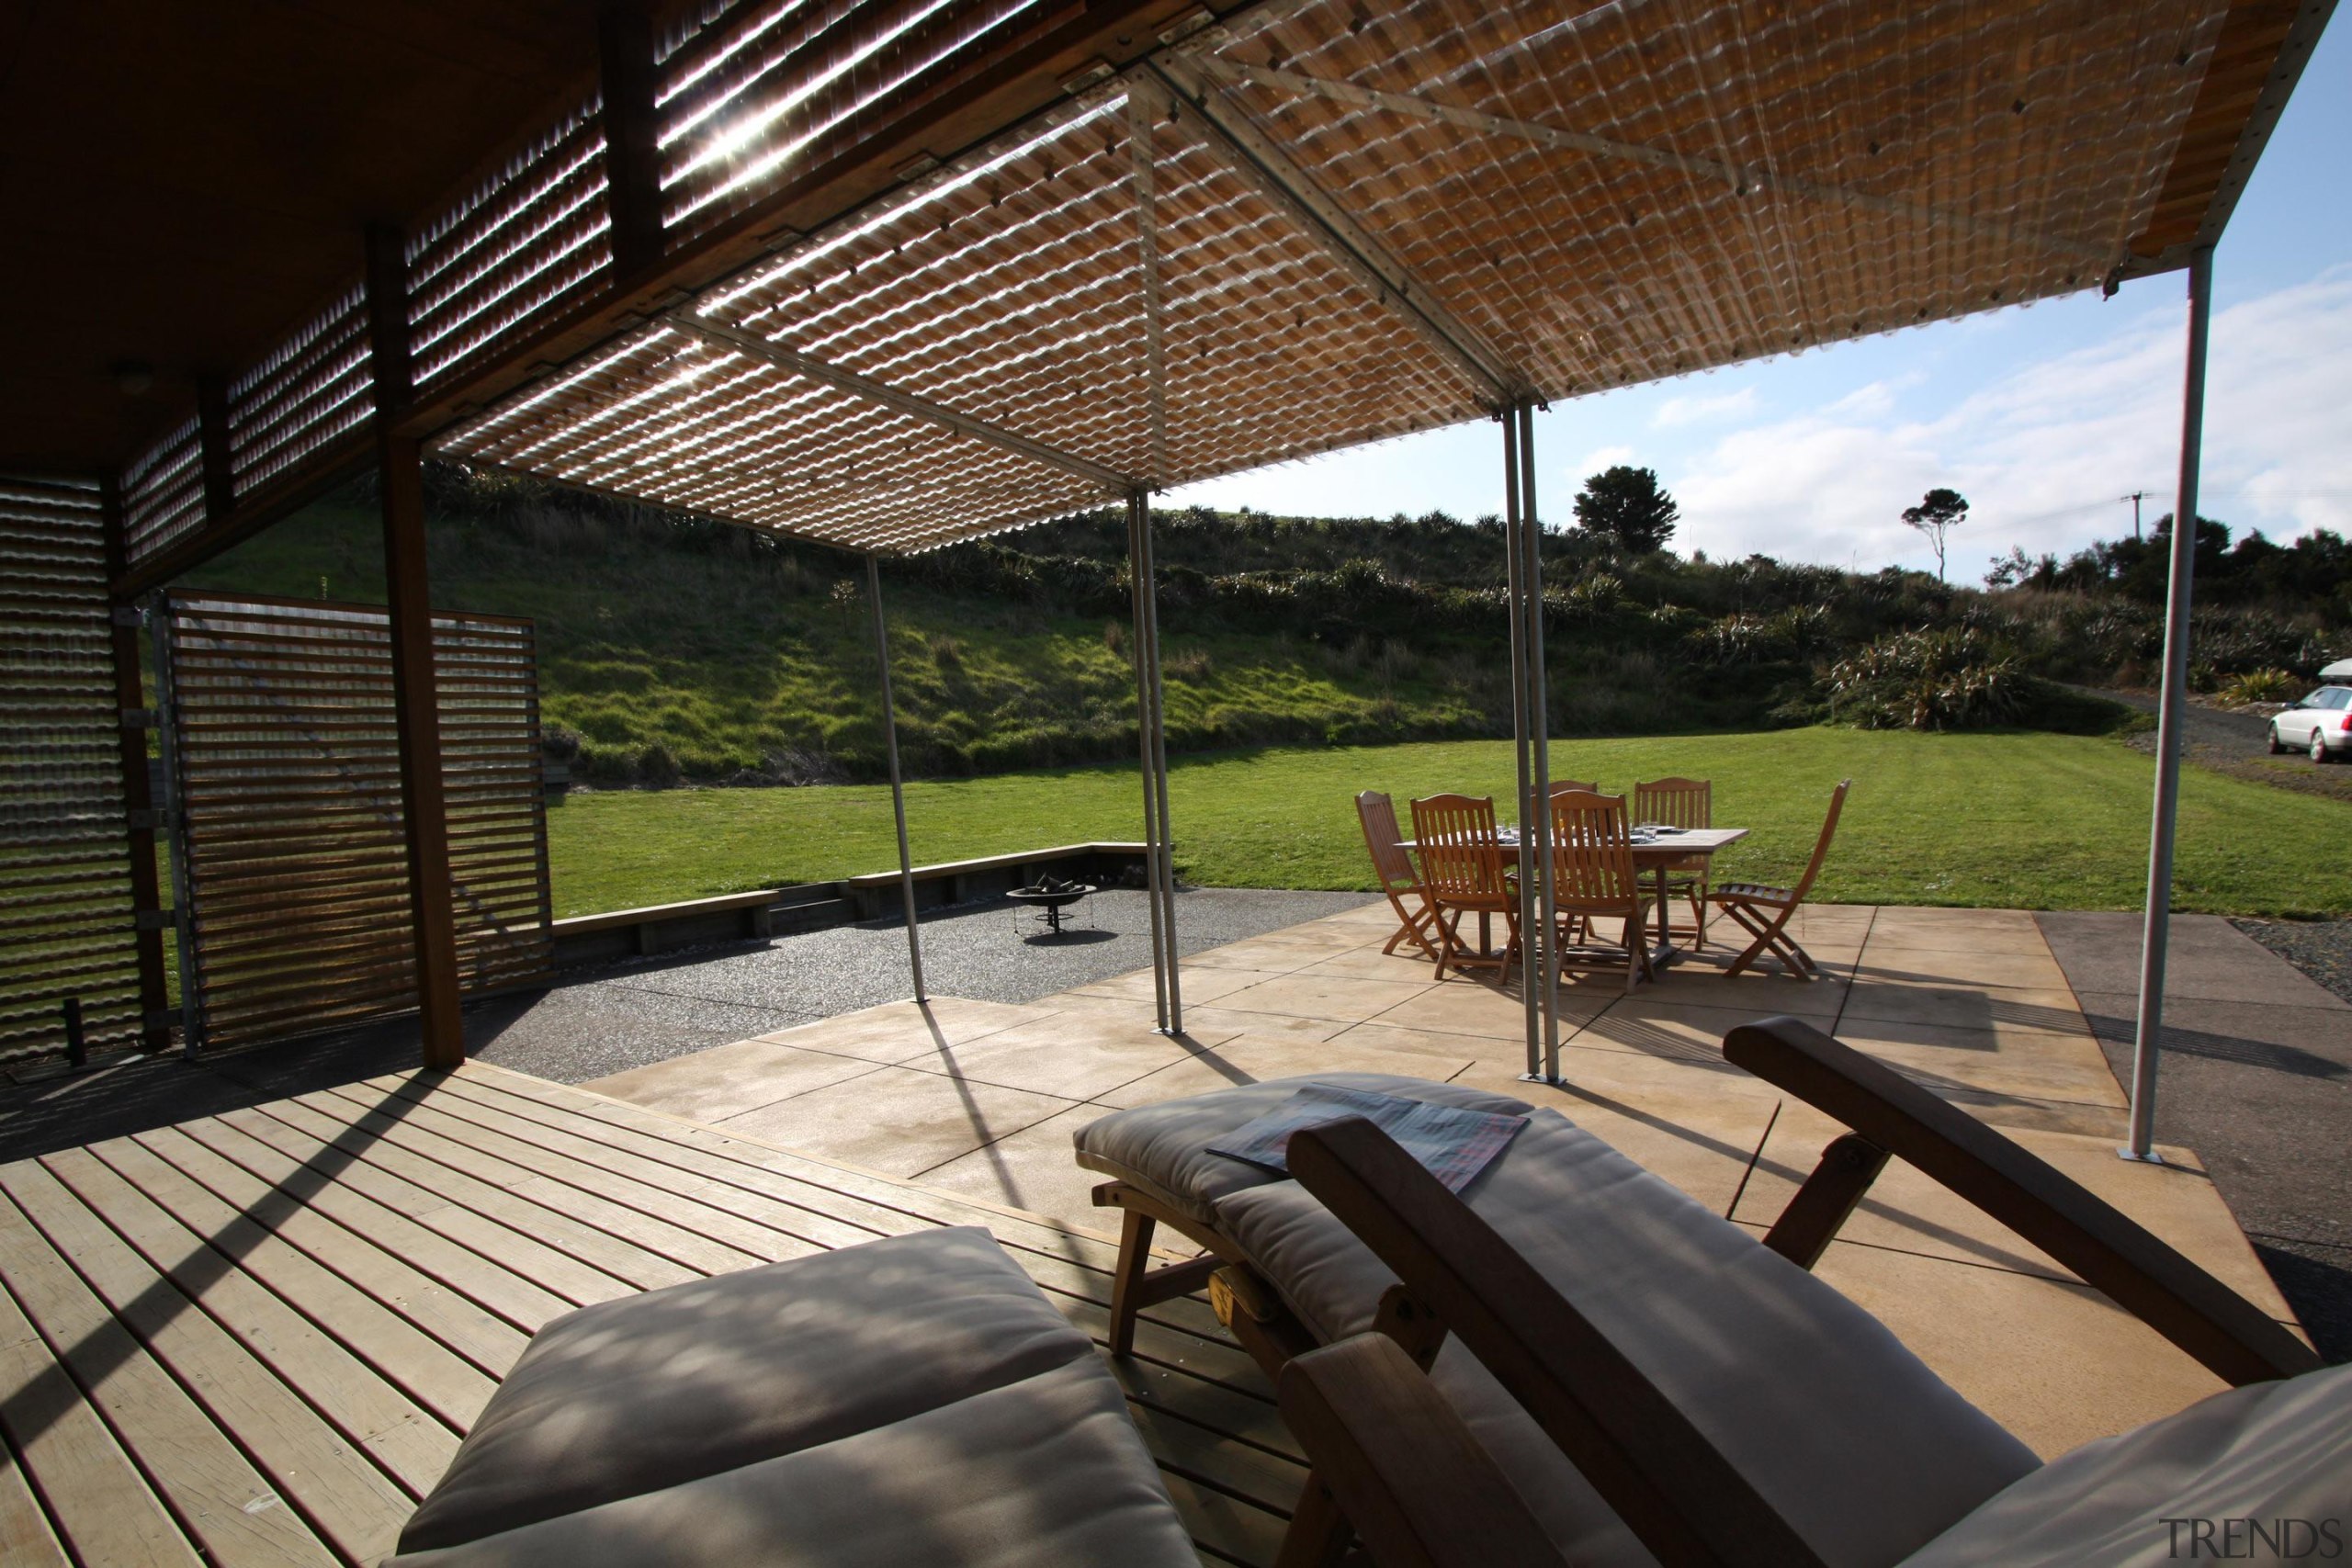 View from the loungers across the terrace to architecture, house, outdoor structure, property, real estate, shade, black